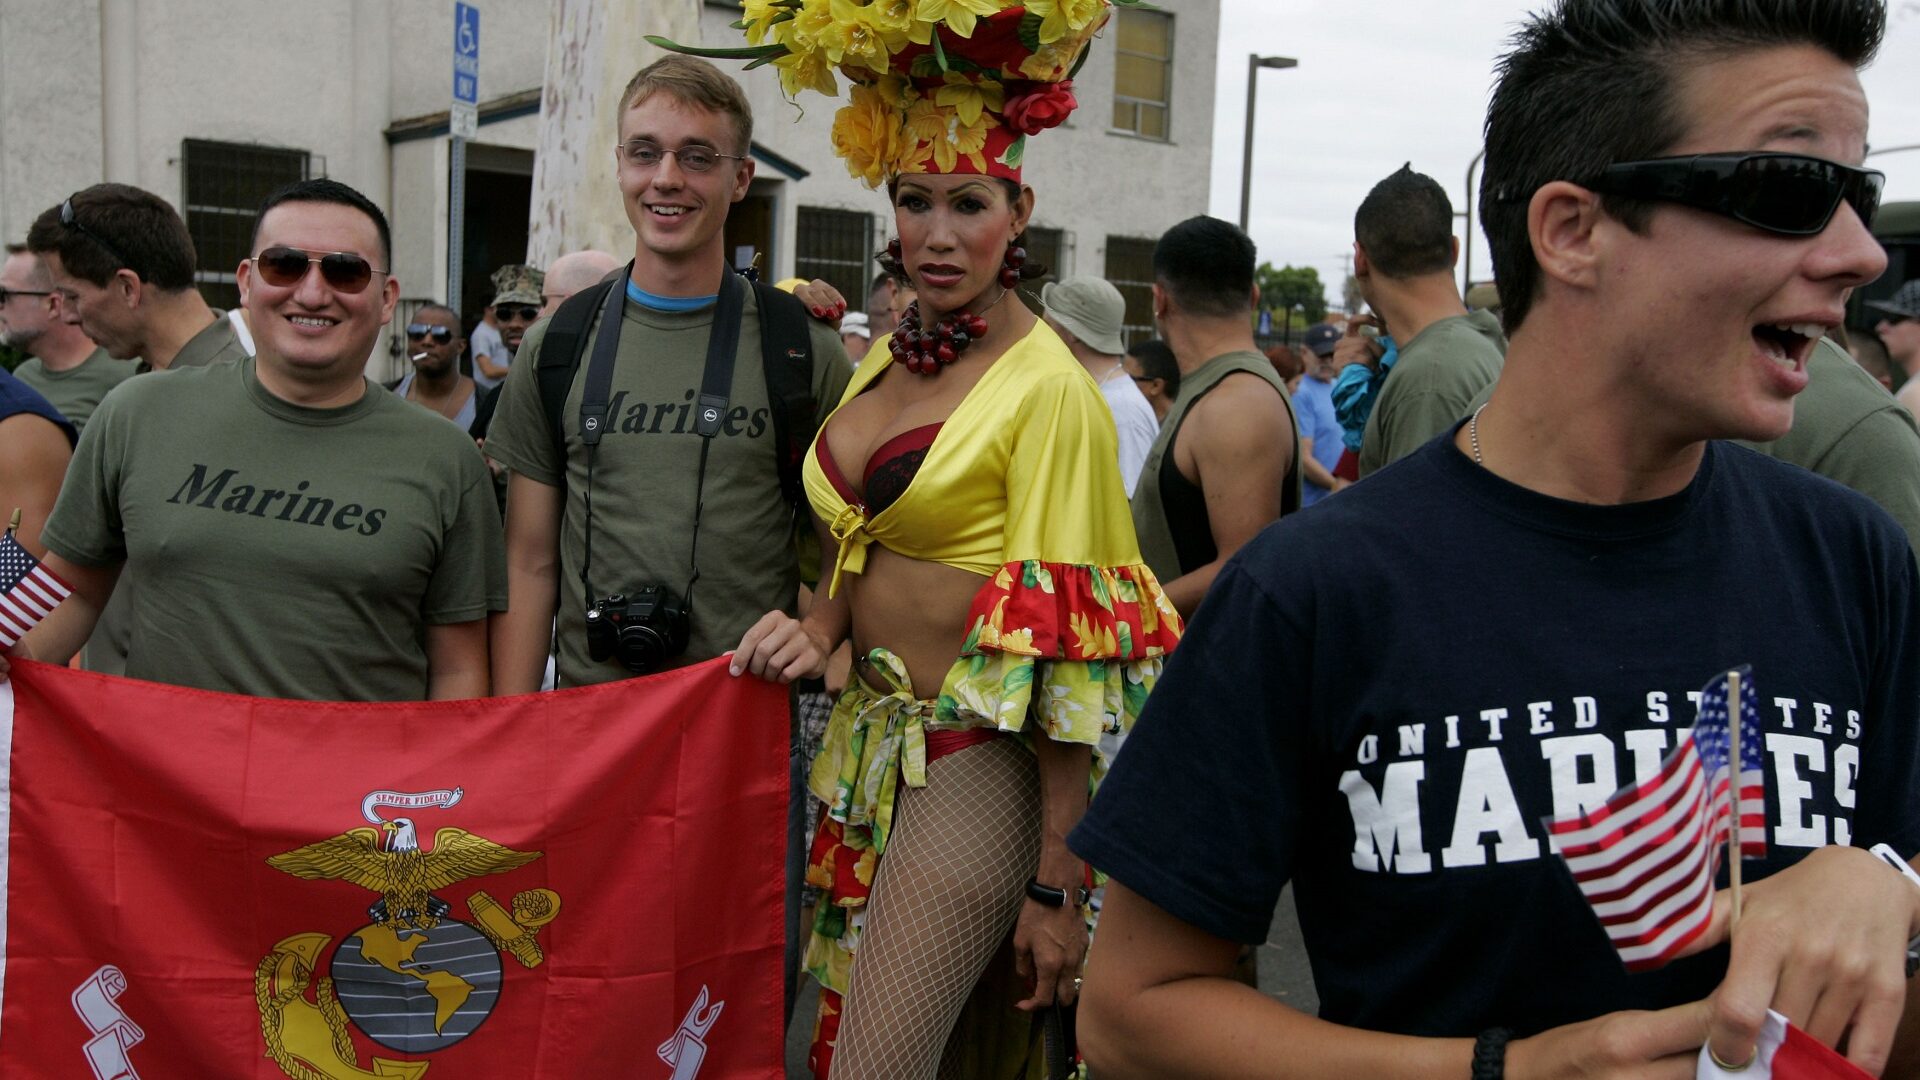 The US military is getting caught up in a war on drag shows